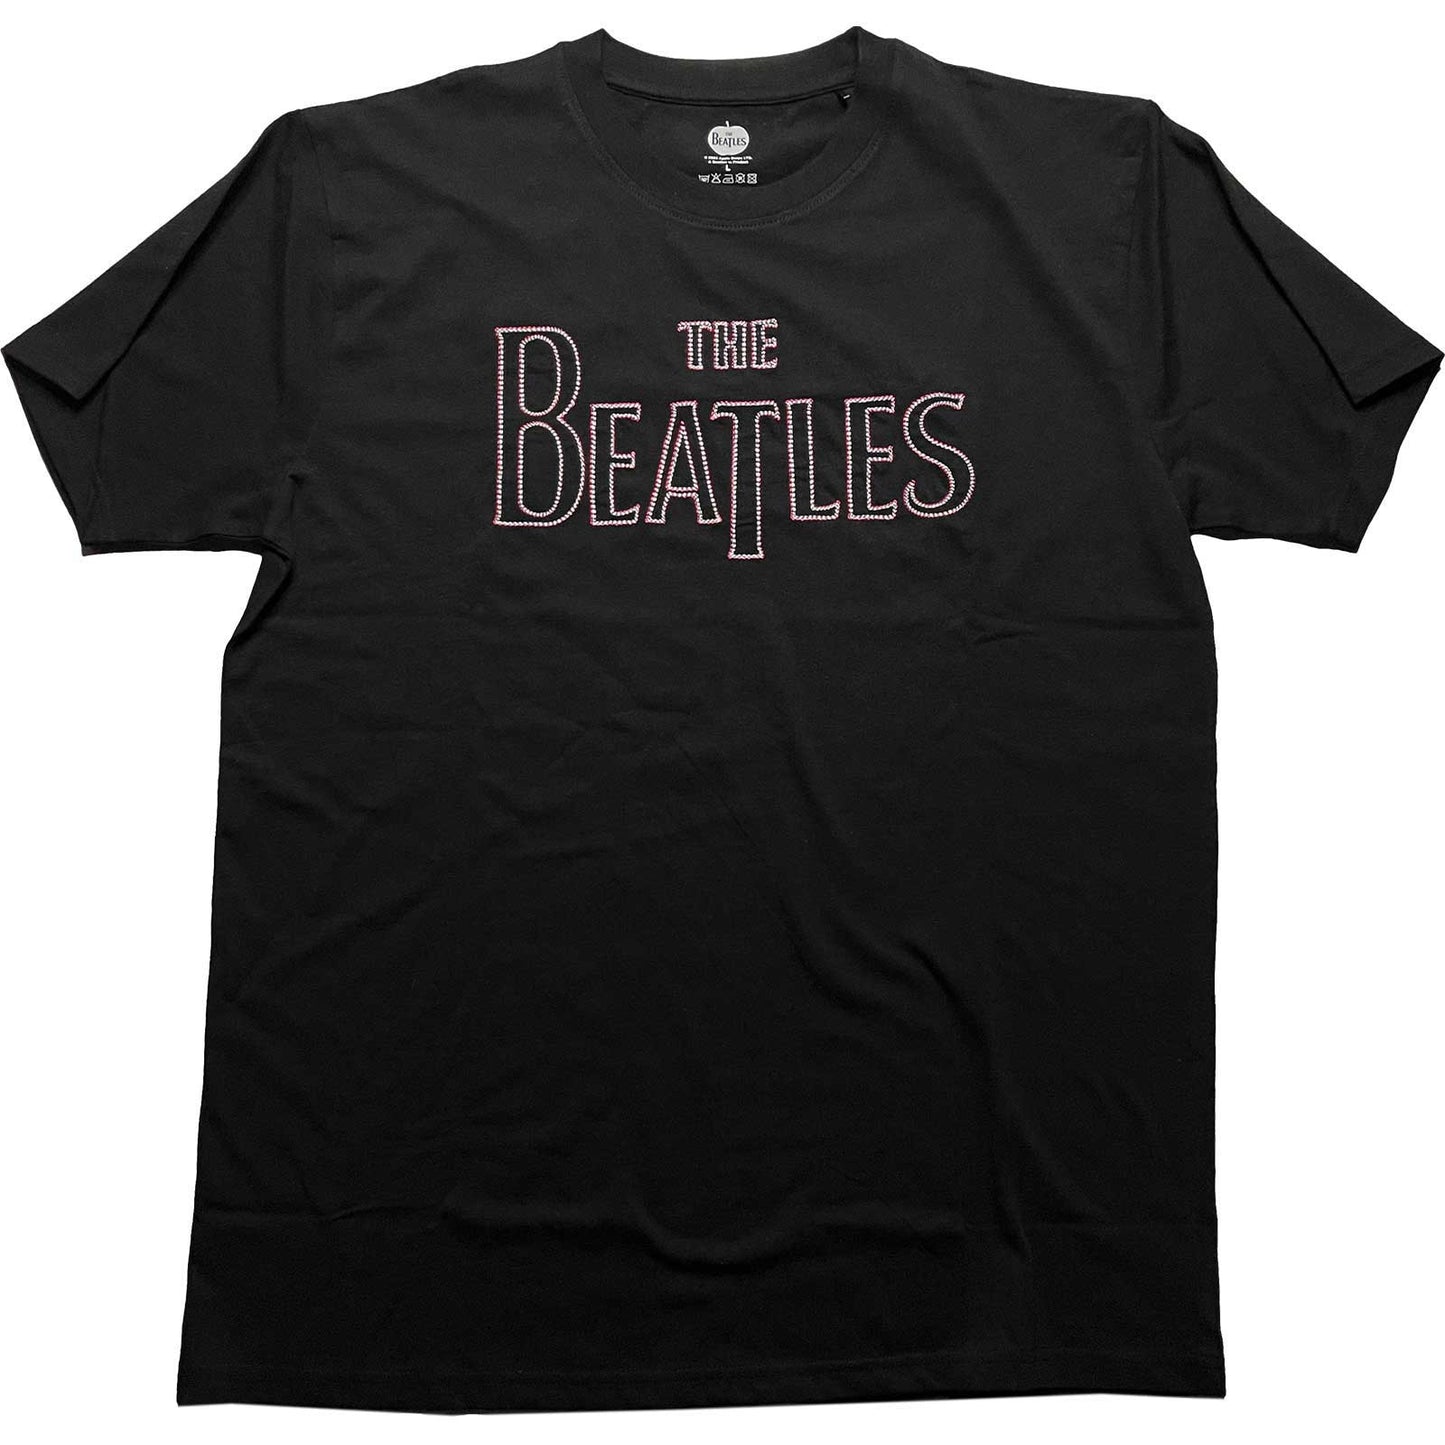 THE BEATLES - EMBROIDERED DROP T-SHIRT